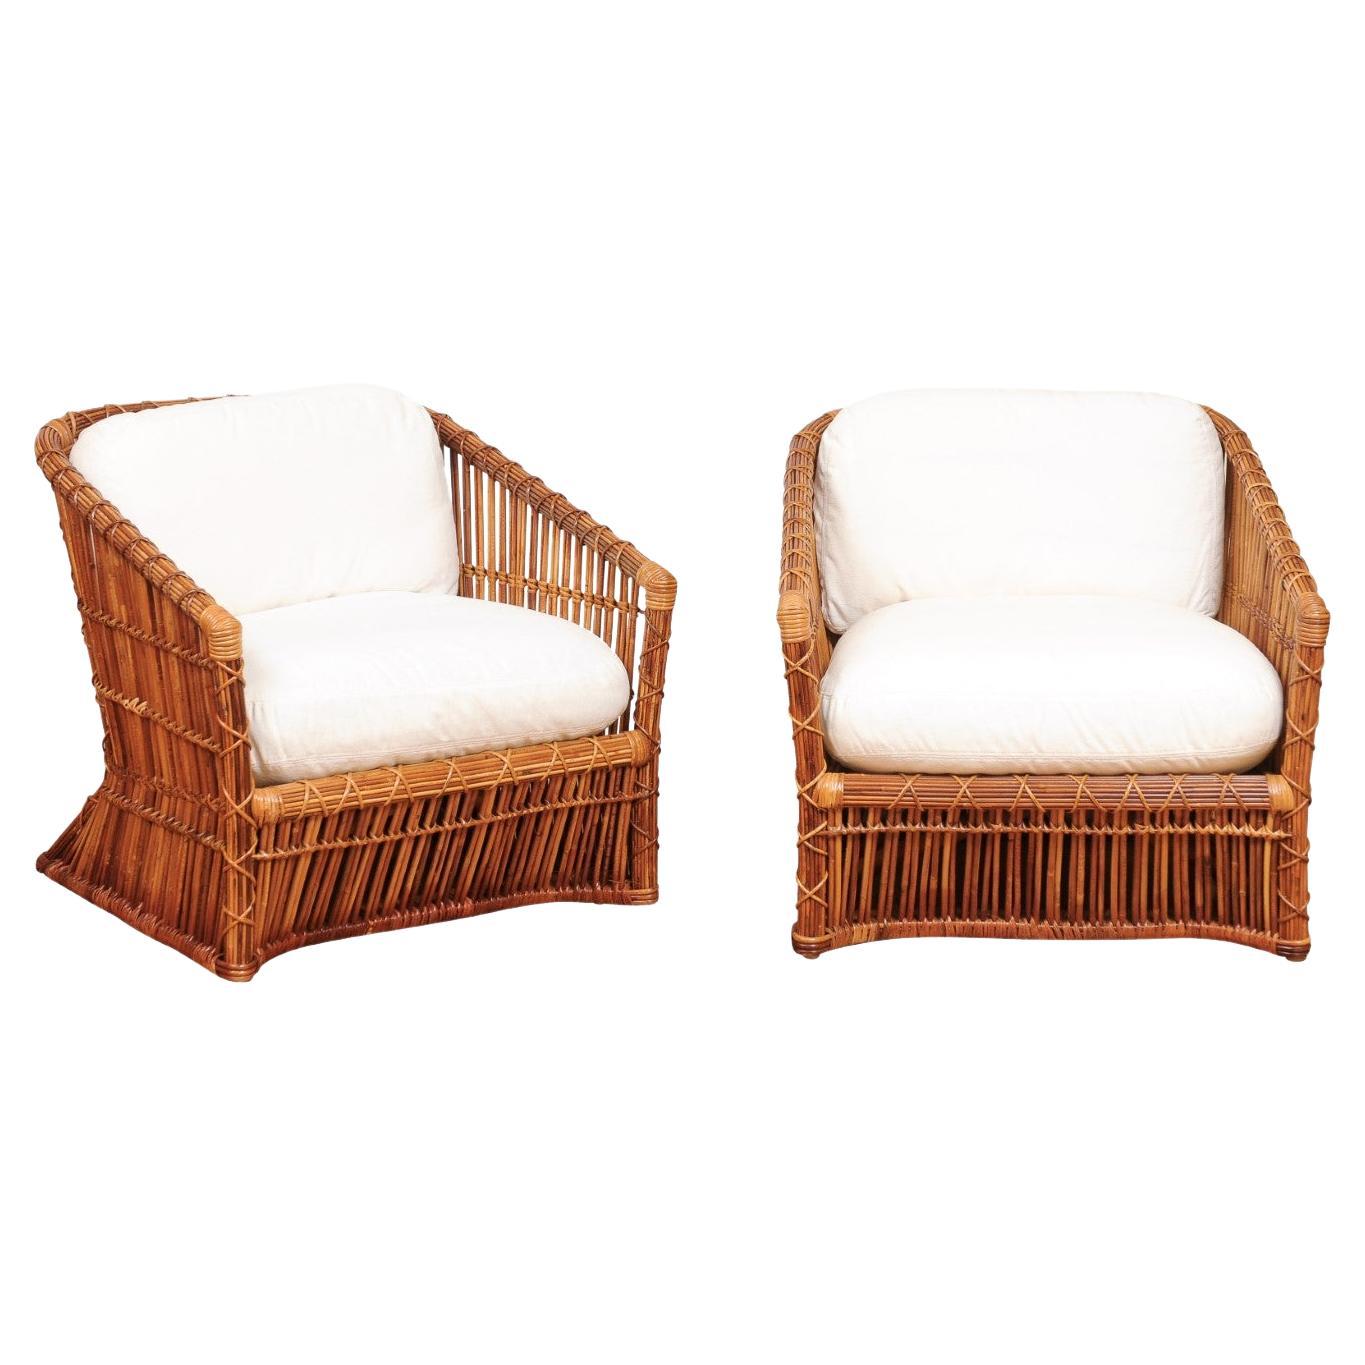 Exceptional Pair of Rattan and Cane Basket Loungers by McGuire, Circa 1975